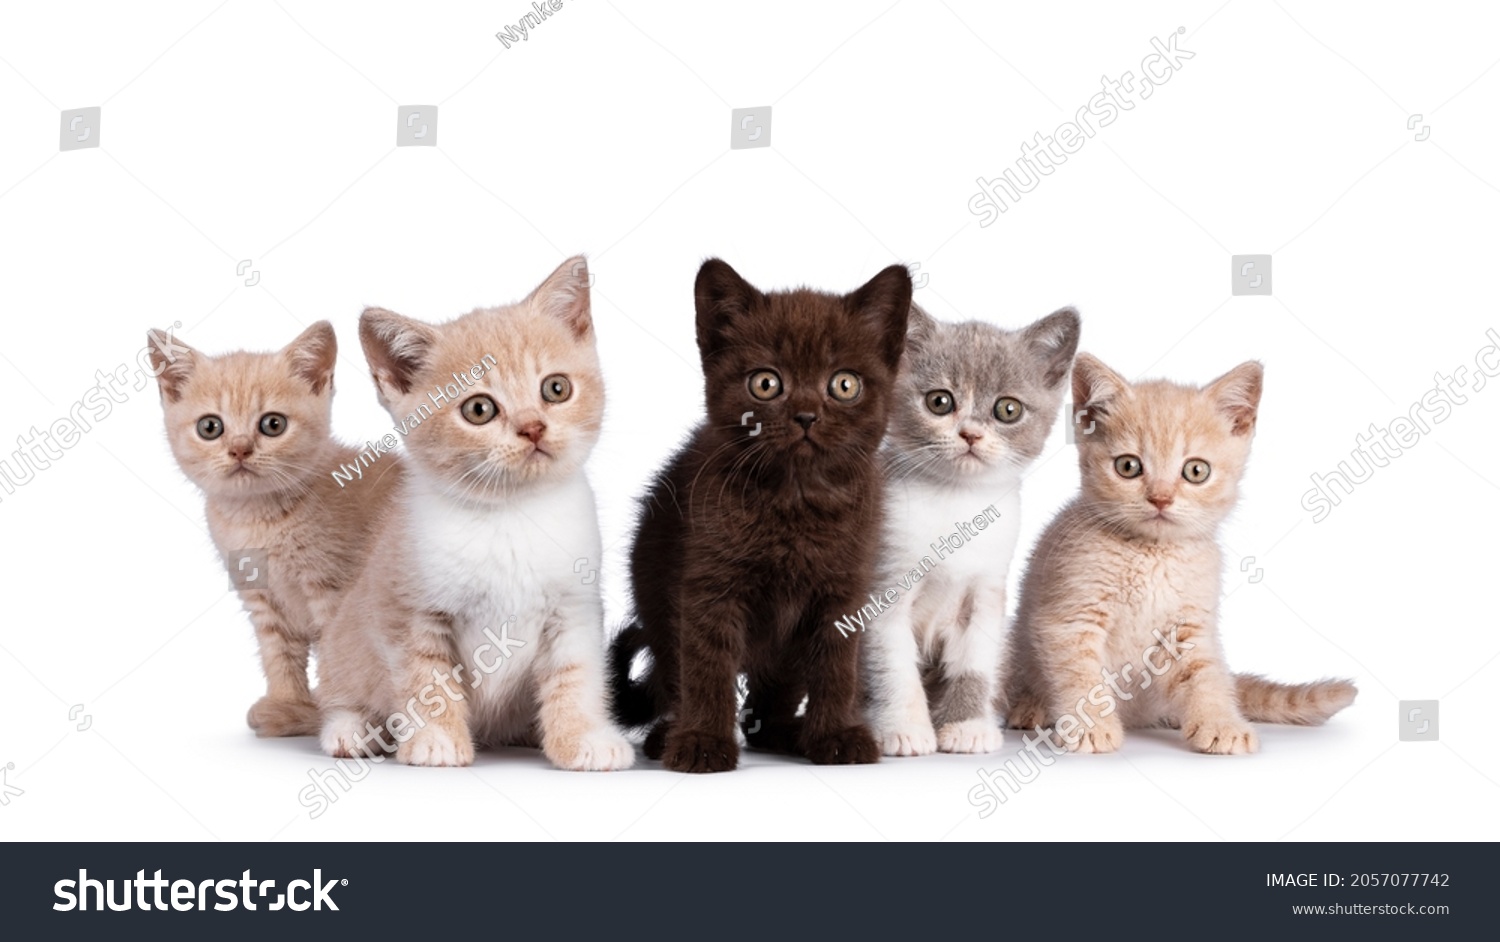 Row of 5 various colored British Shorthair cat kittens, standing and sitting together. All facing camera. Isolated on on white background. #2057077742